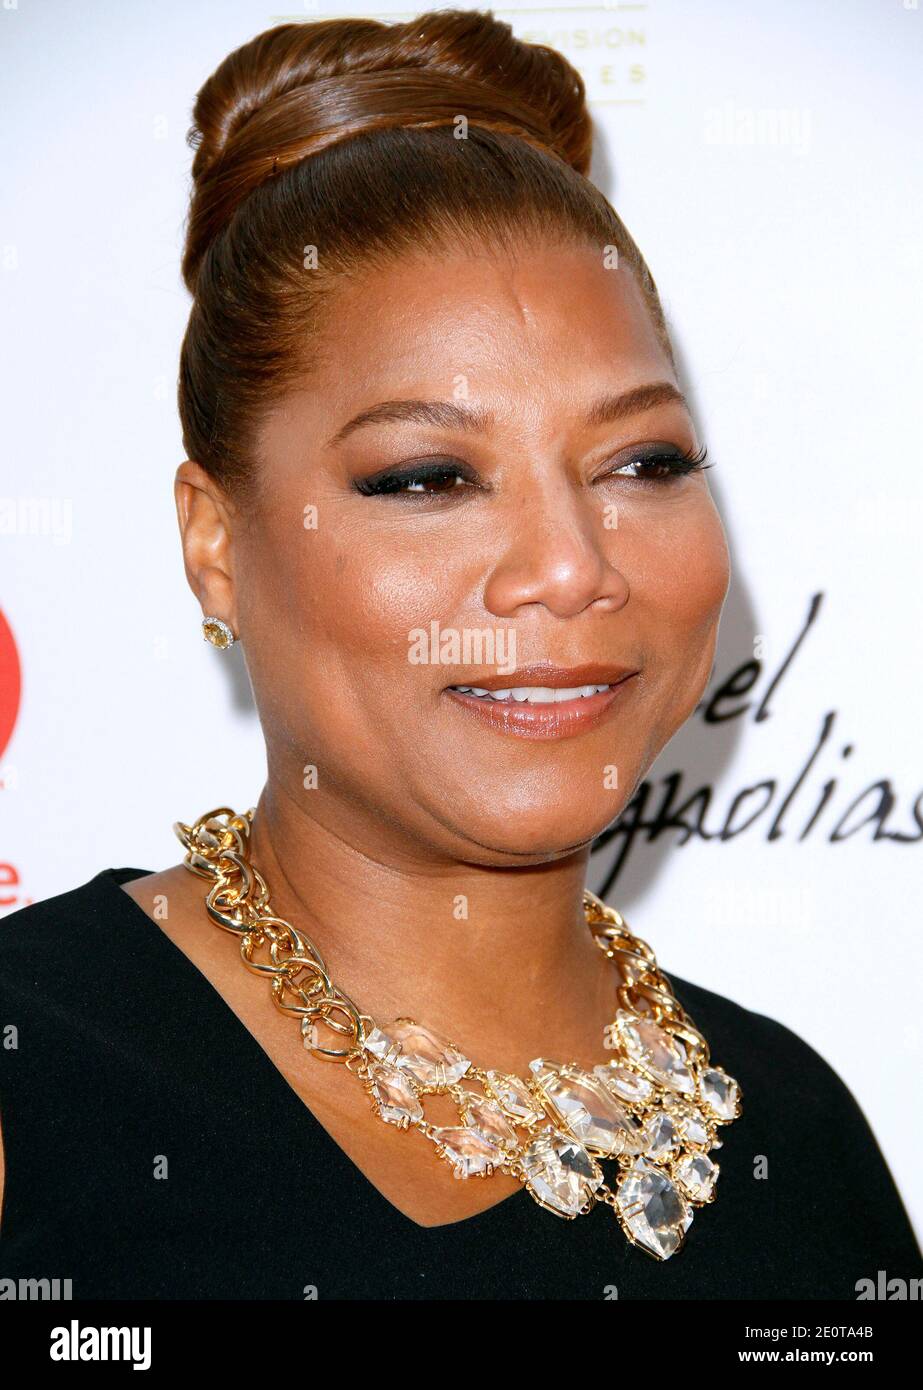 Queen Latifah attends the Steel Magnolias Premiere at the Paris Theater in New York City, NY, USA, on October 3, 2012. Photo by Donna Ward/ABACAPRESS.COM Stock Photo